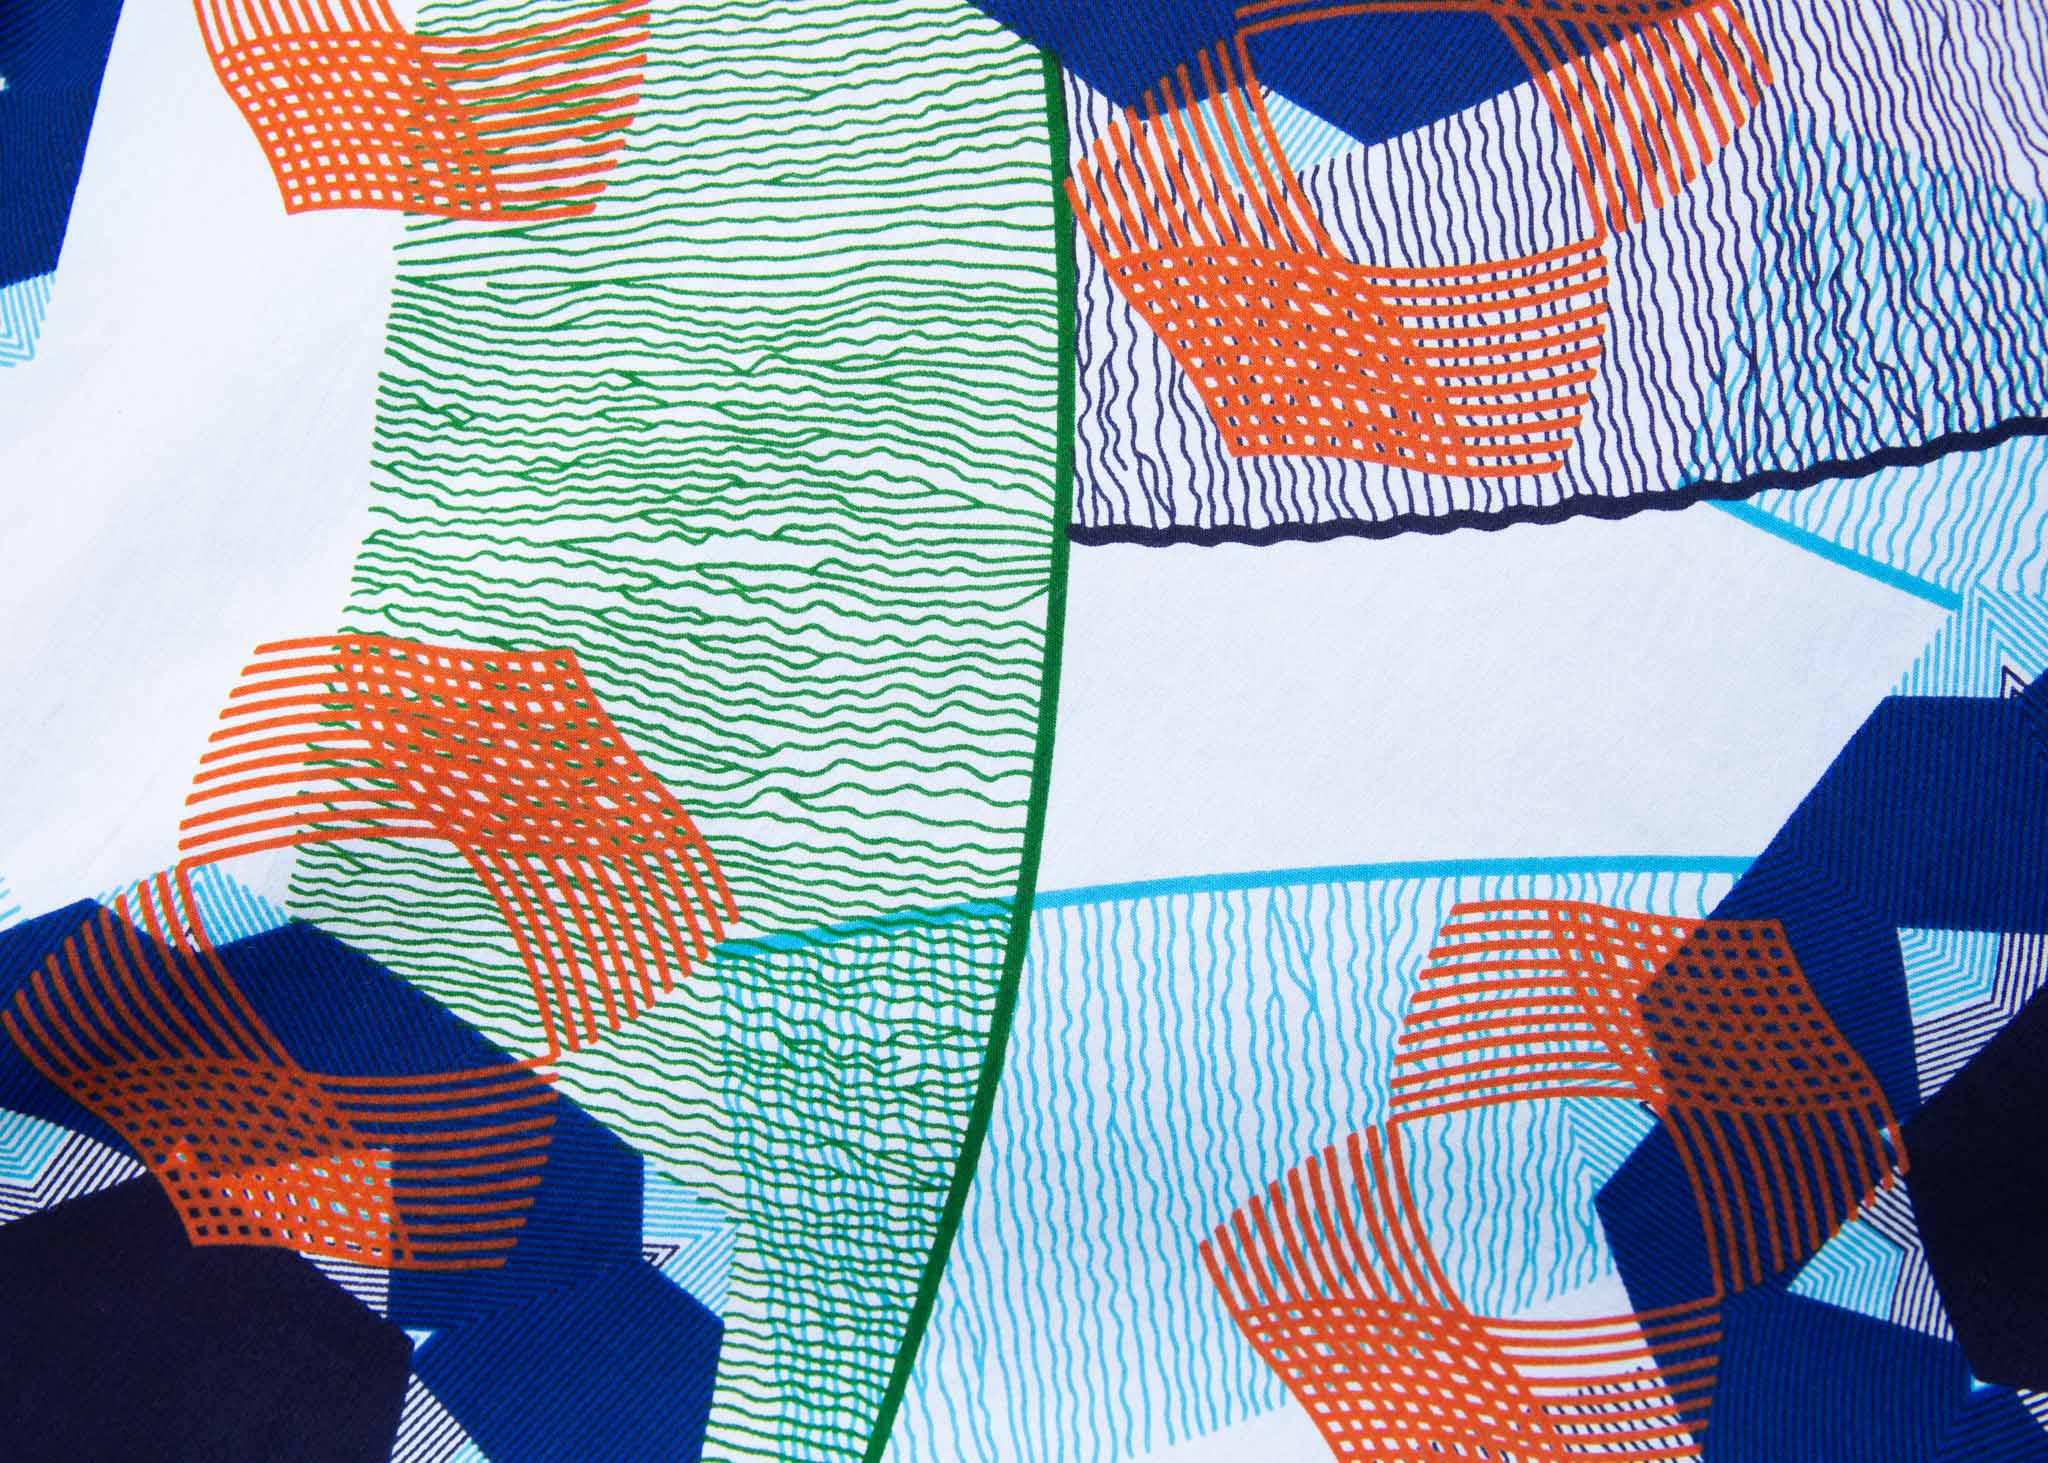 Close up display of dress with blue, green and orange abstract circular design pattern, fabric.